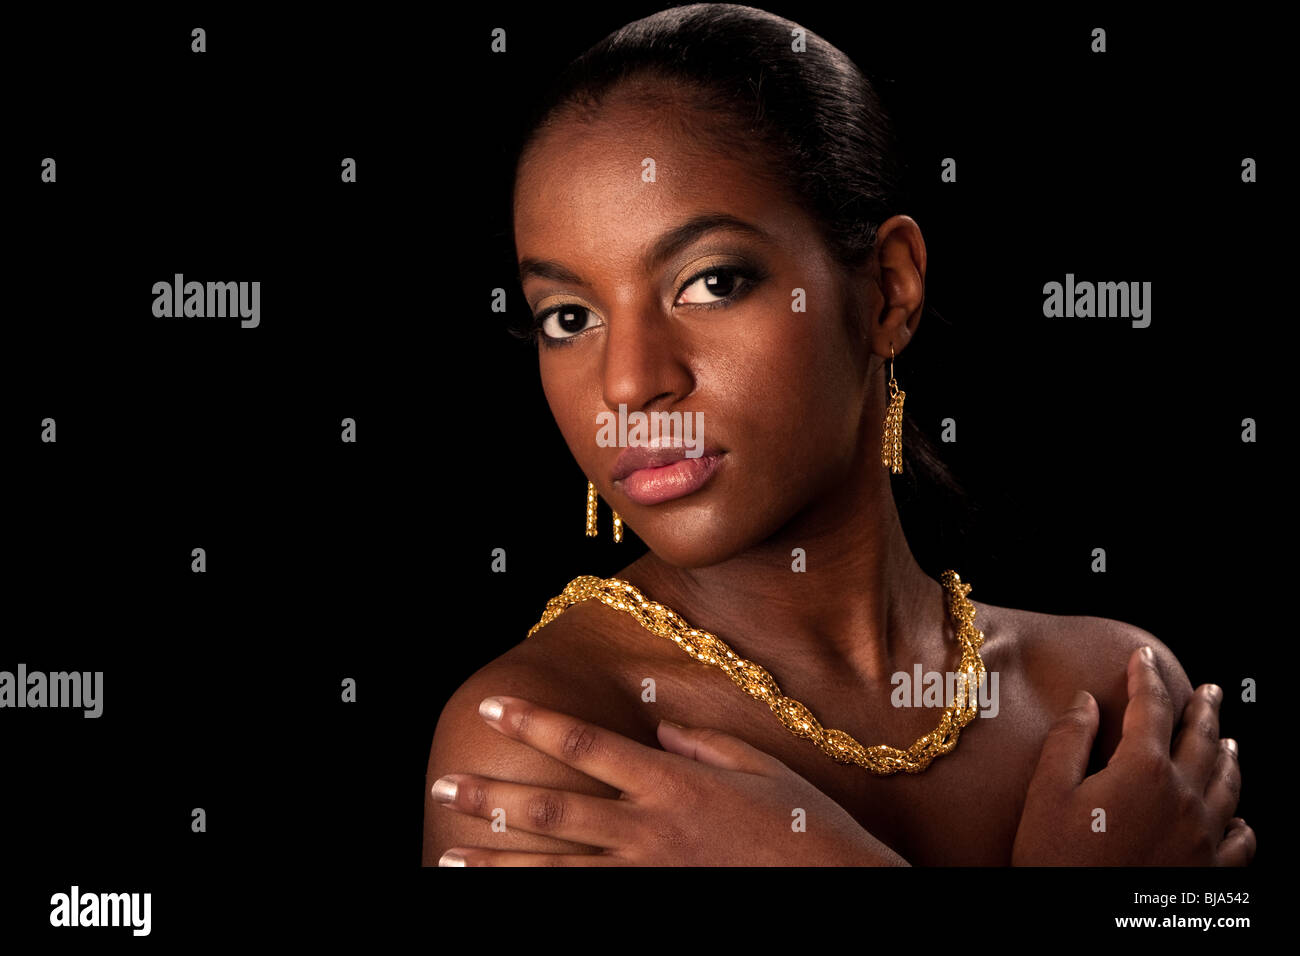 Face of beautiful African American woman with gold earrings and necklace, isolated. Stock Photo